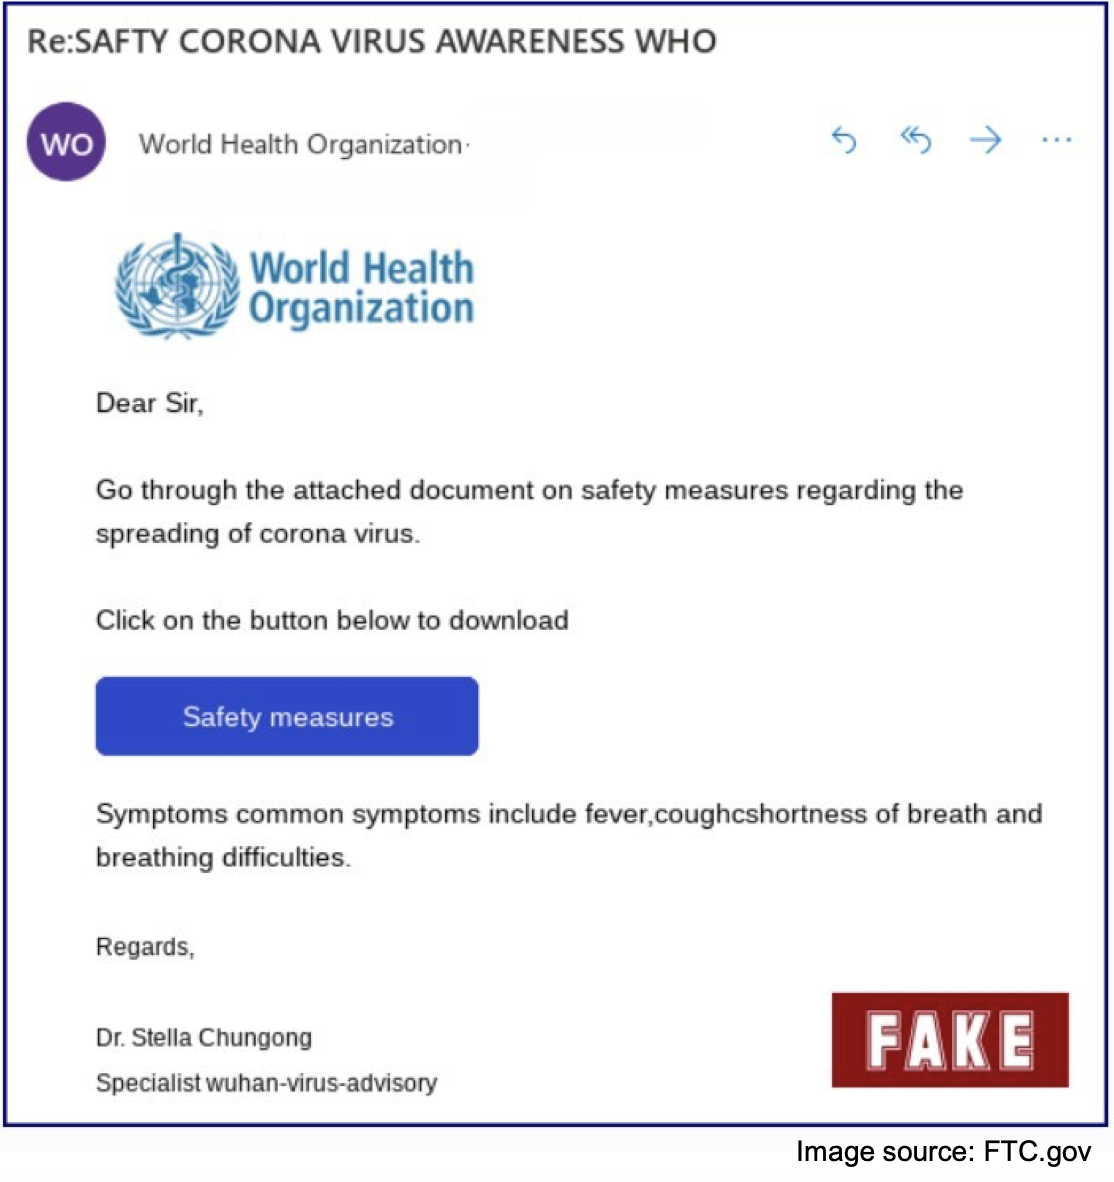 A fake covid 19 email urging people to click on a phishing link